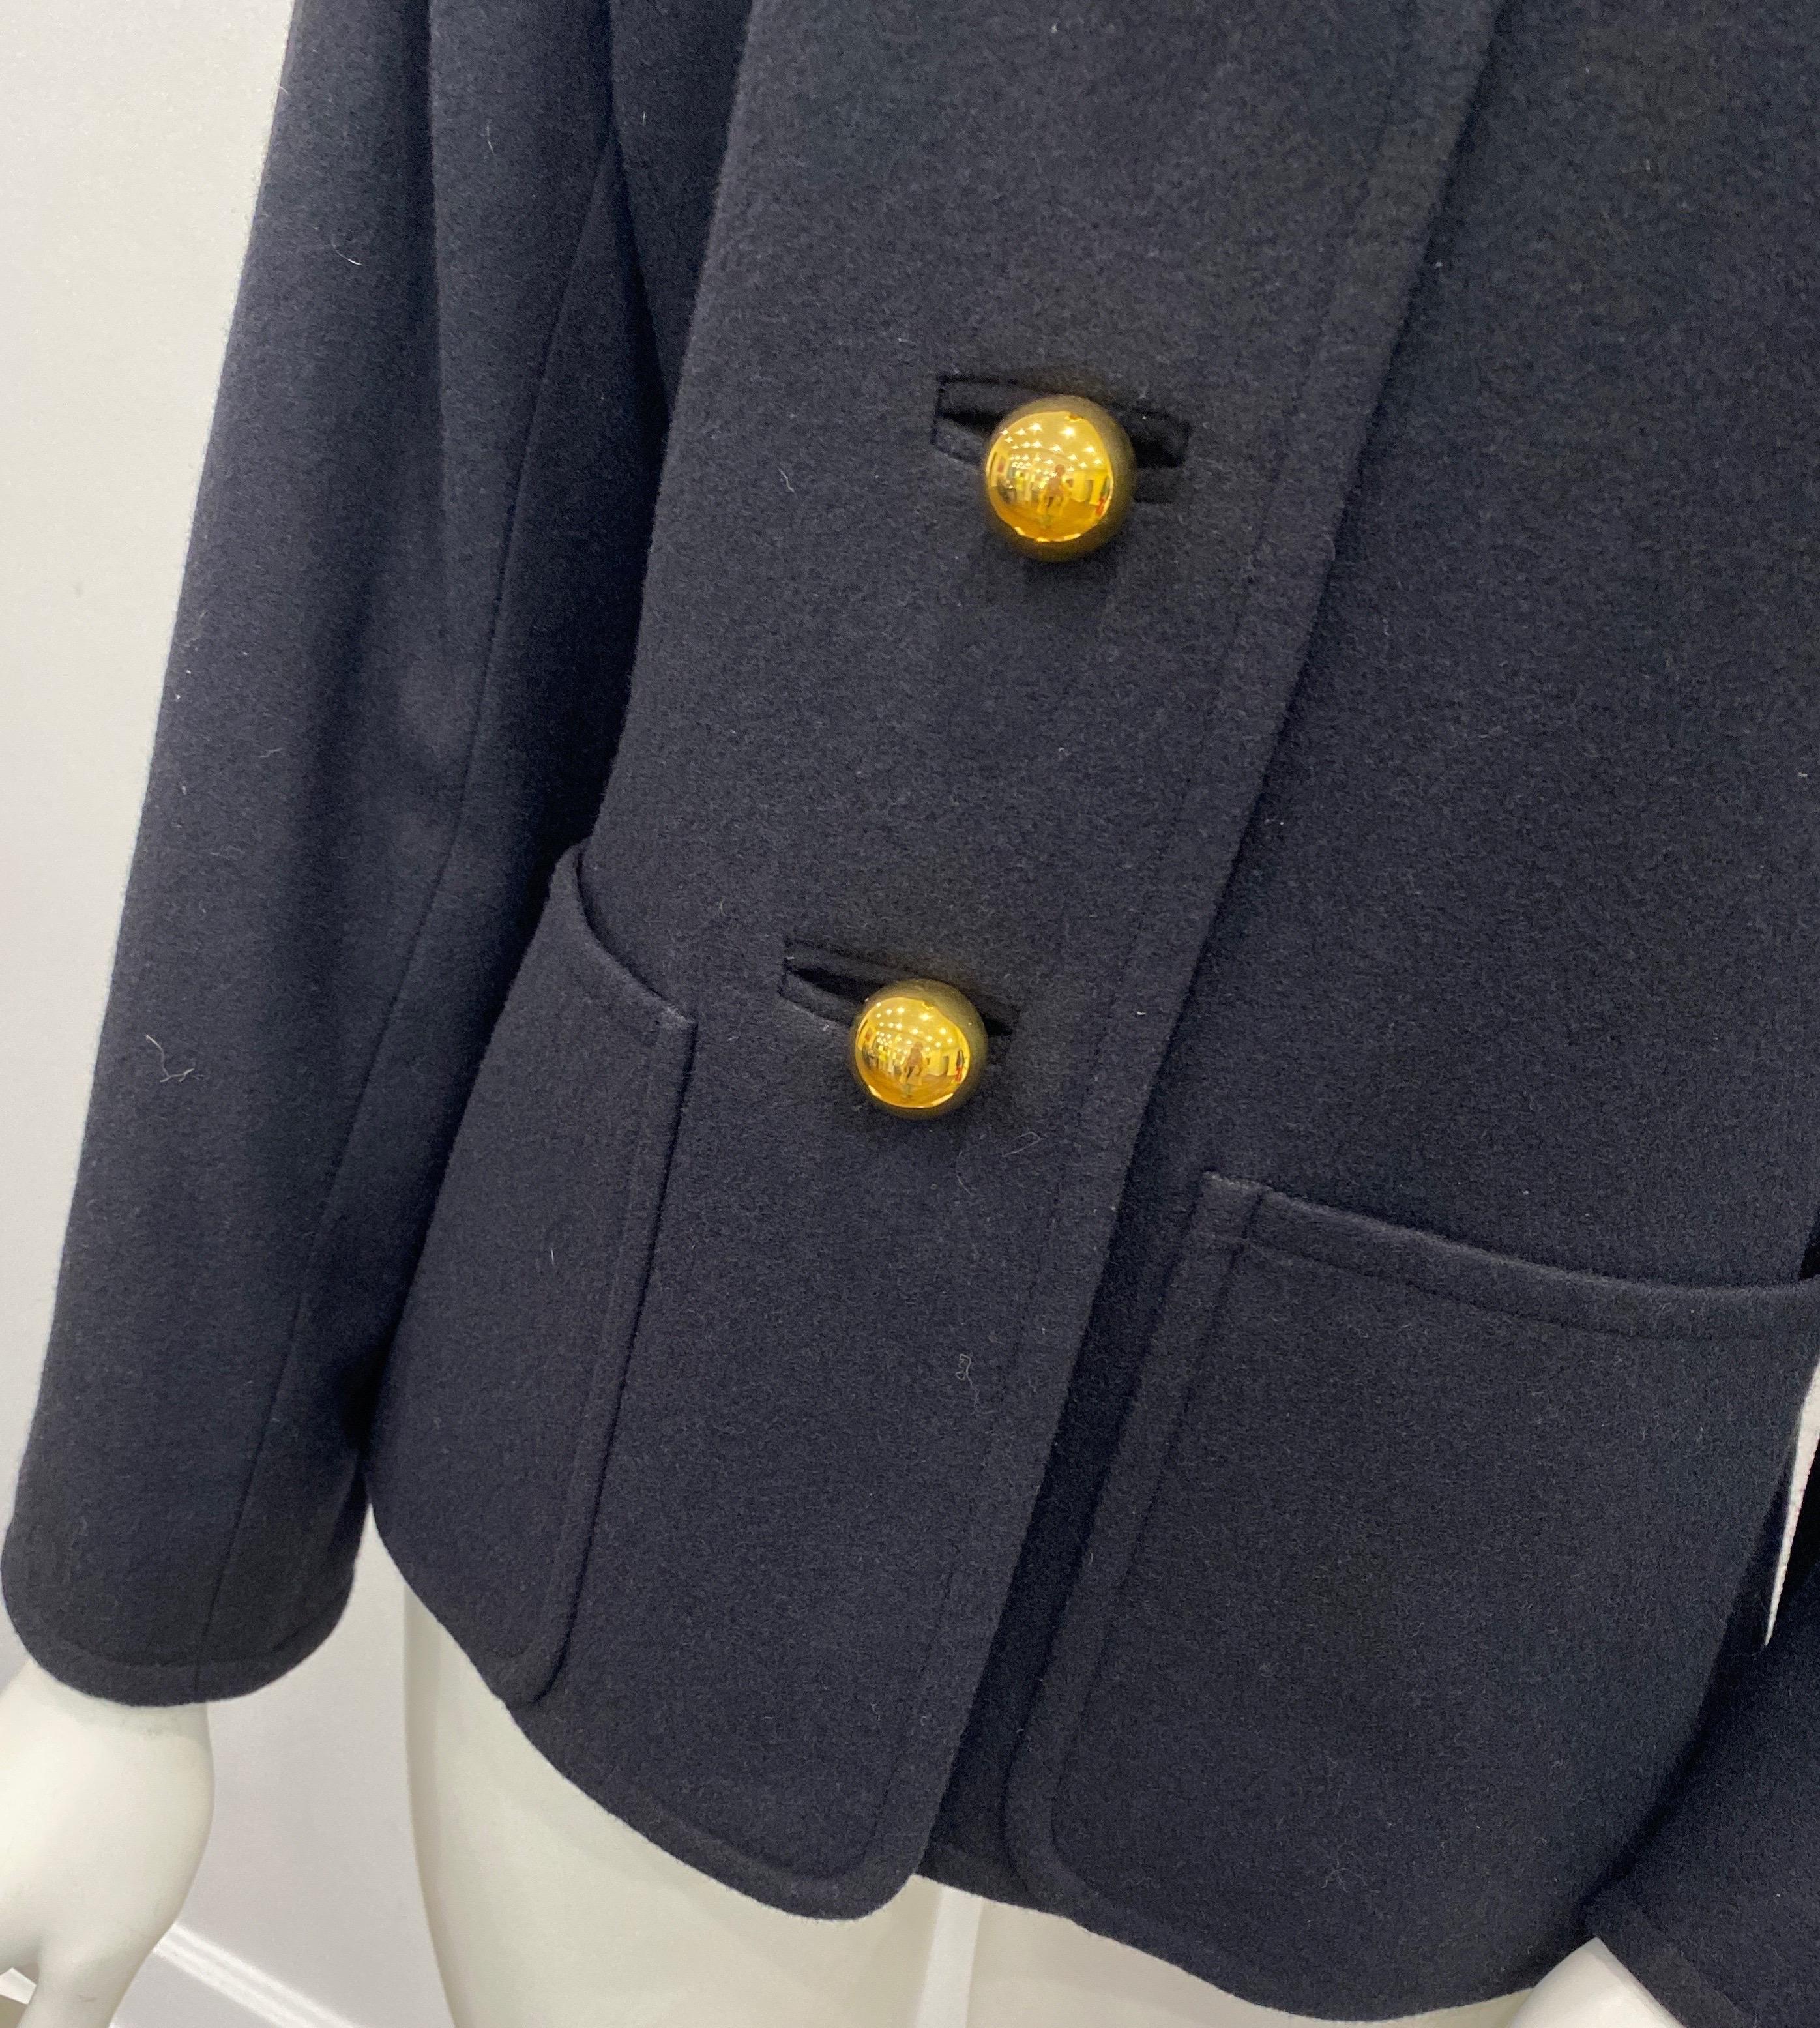 Yves Saint Laurent 1970's Black Soft Double-Faced Wool Jacket - Size 44 For Sale 1